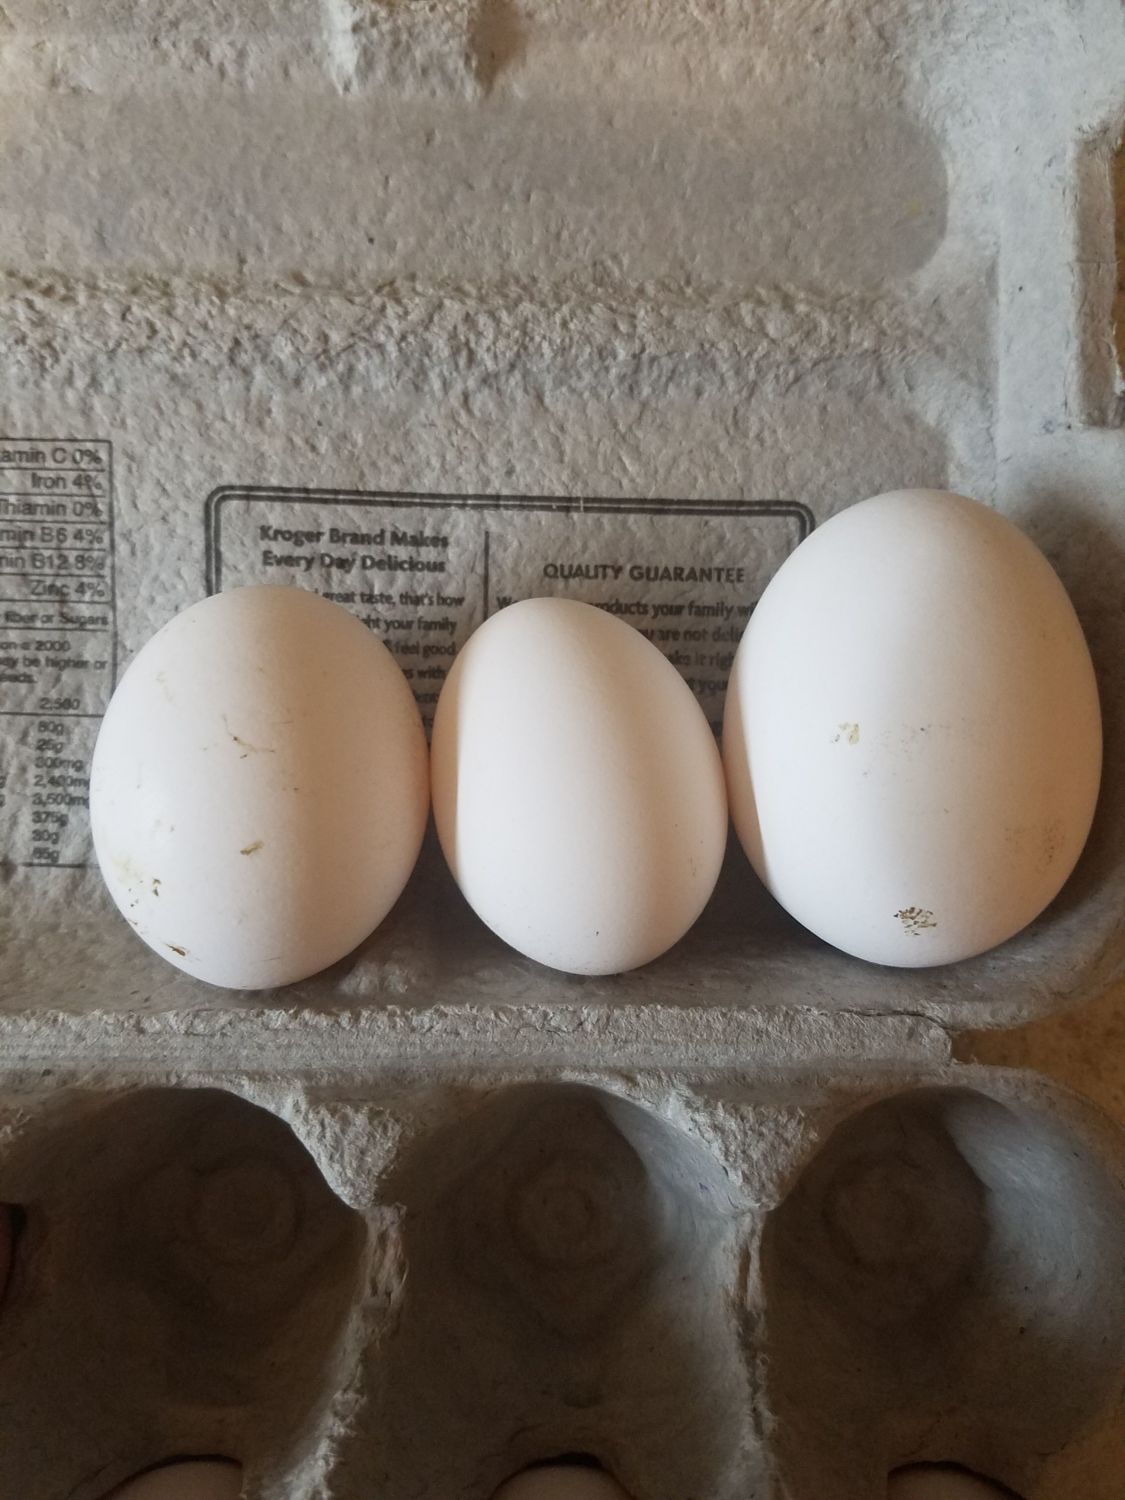 White leghorn suddenly laid a giant egg! Could it be a double